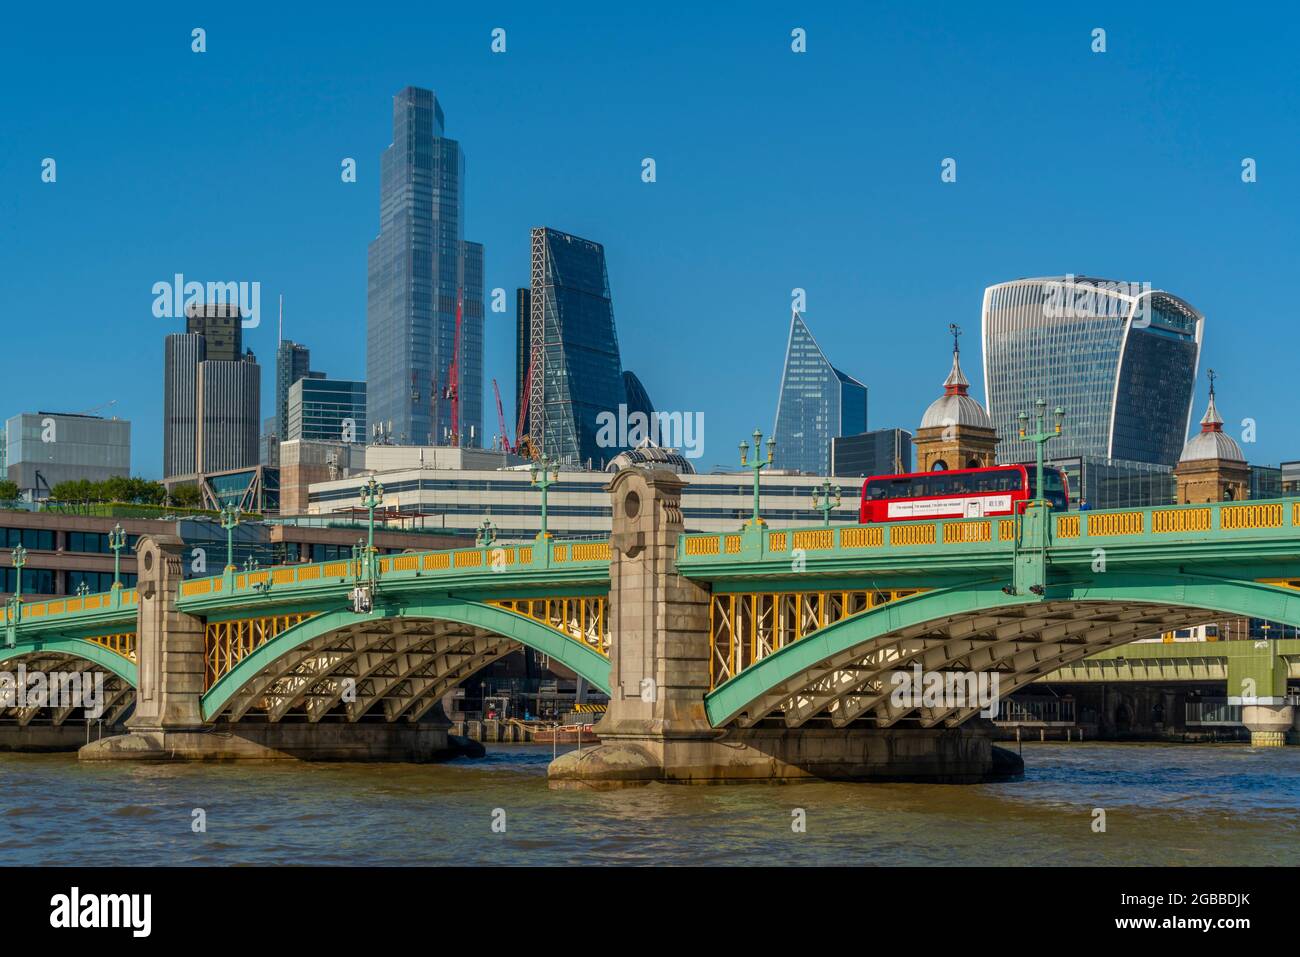 View of Southwark Bridge and the City of London in the background, London, England, United Kingdom, Europe Stock Photo